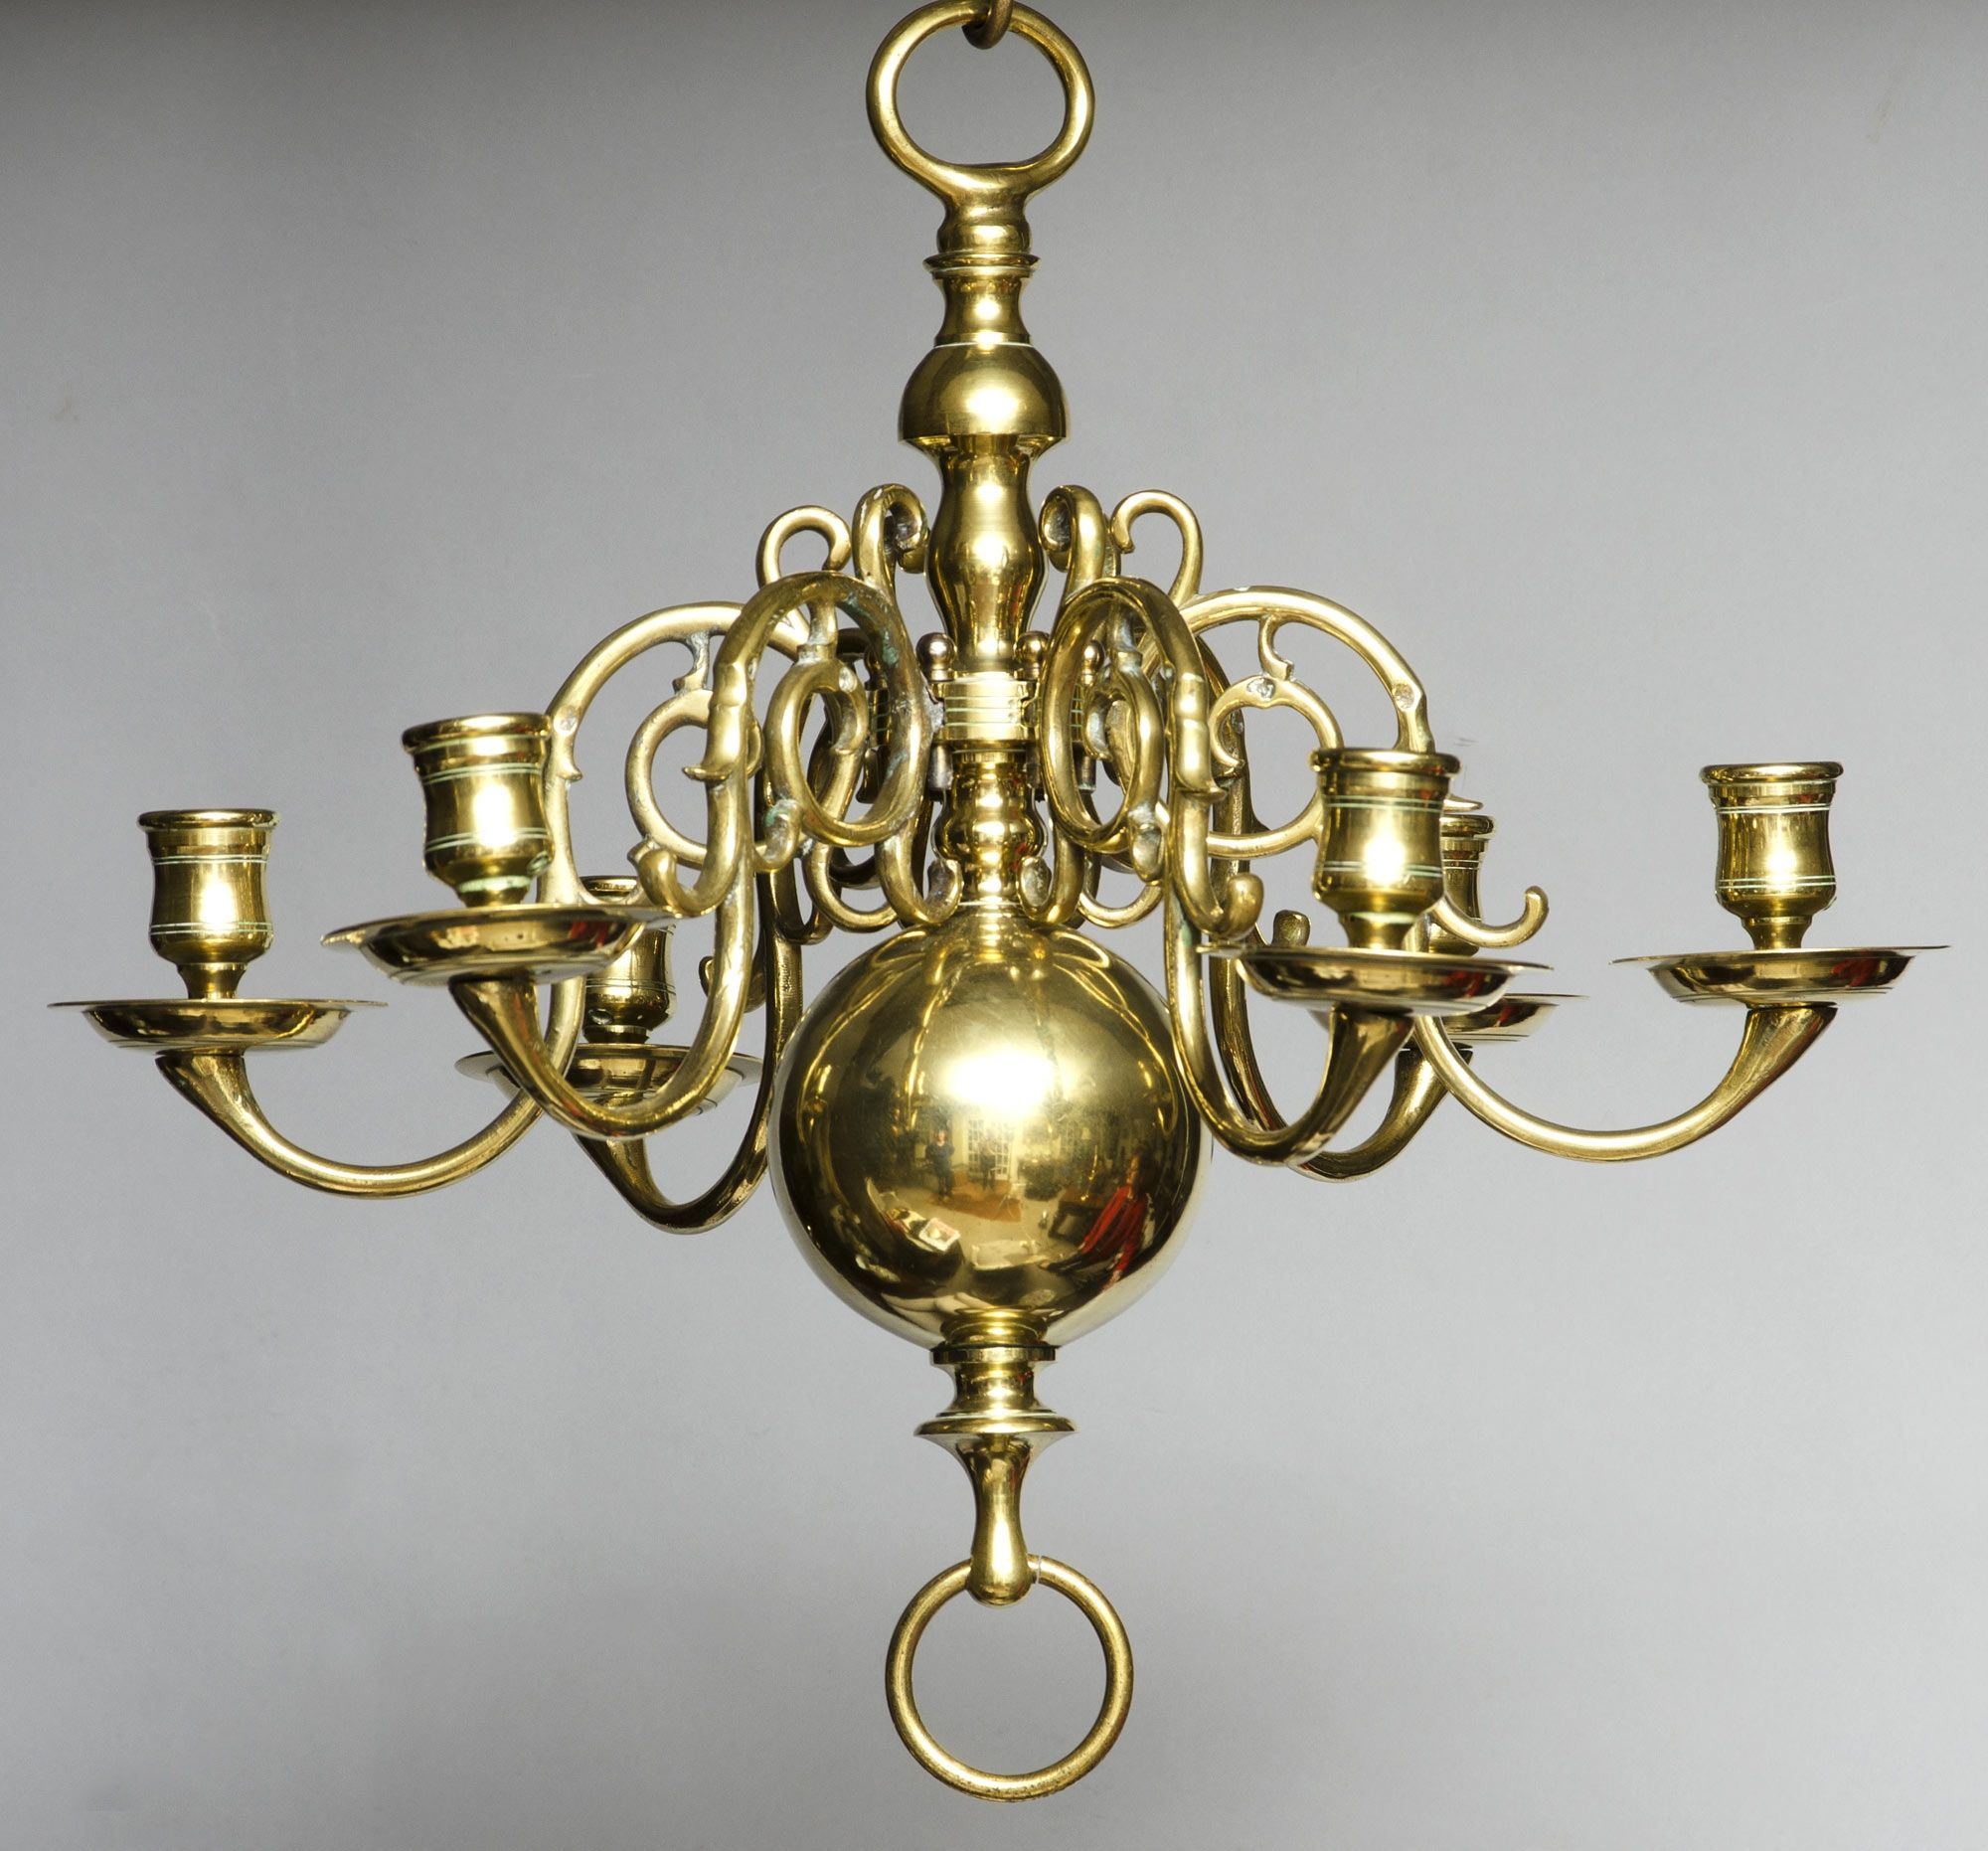 Brass Chandelier Vintage For Your Decorating Home Ideas With Brass Pertaining To Vintage Brass Chandeliers (Photo 9 of 12)